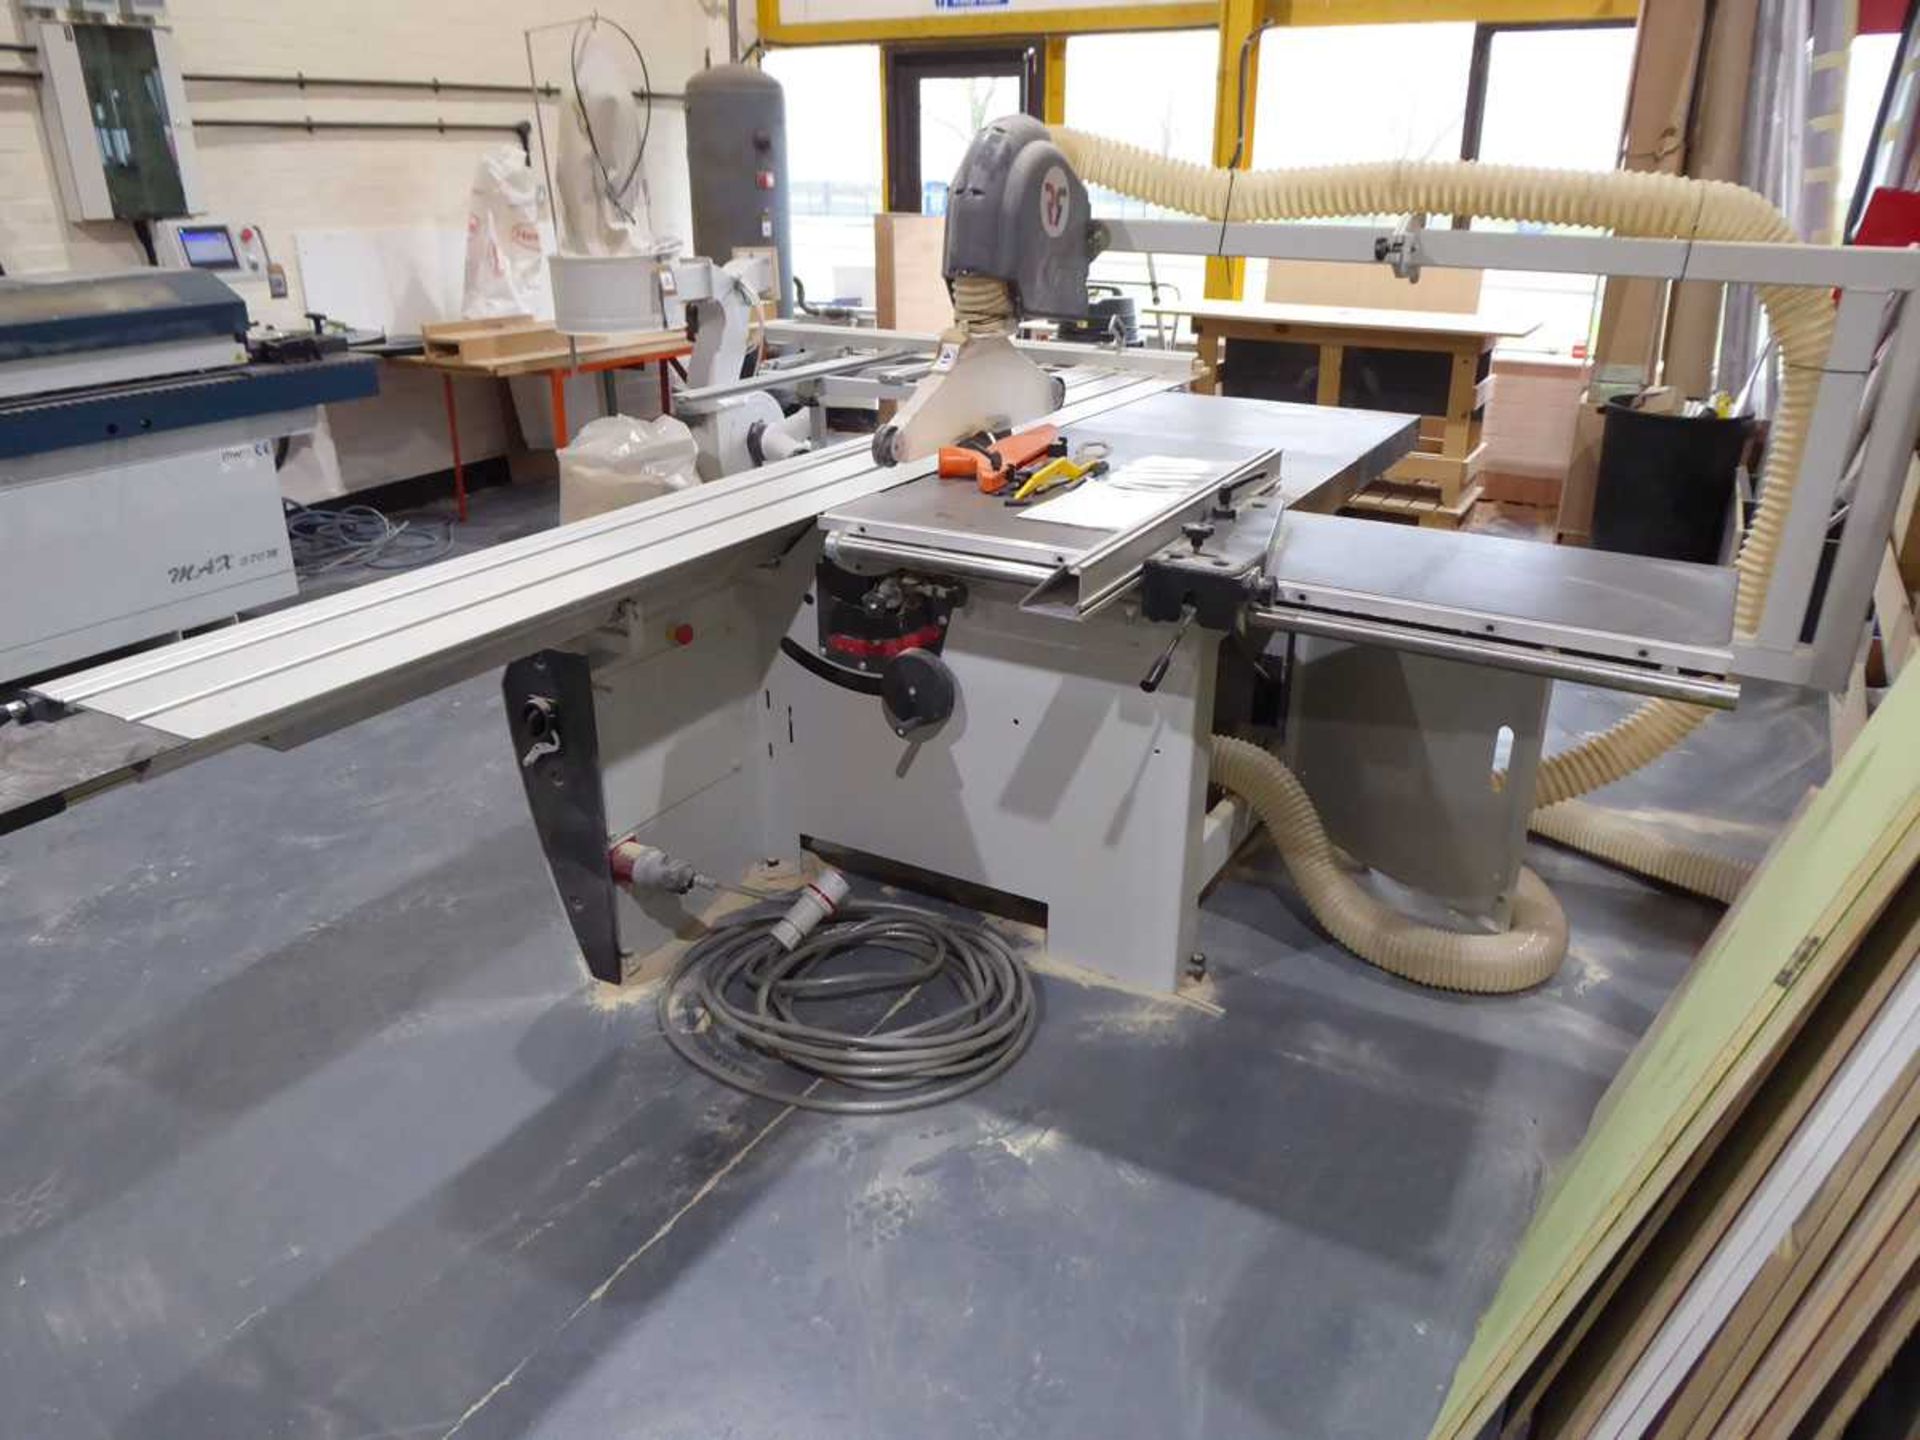 +VAT Robland FZ300 sliding table panel saw, serial no. 26KL22556, year 2020 - Image 2 of 7